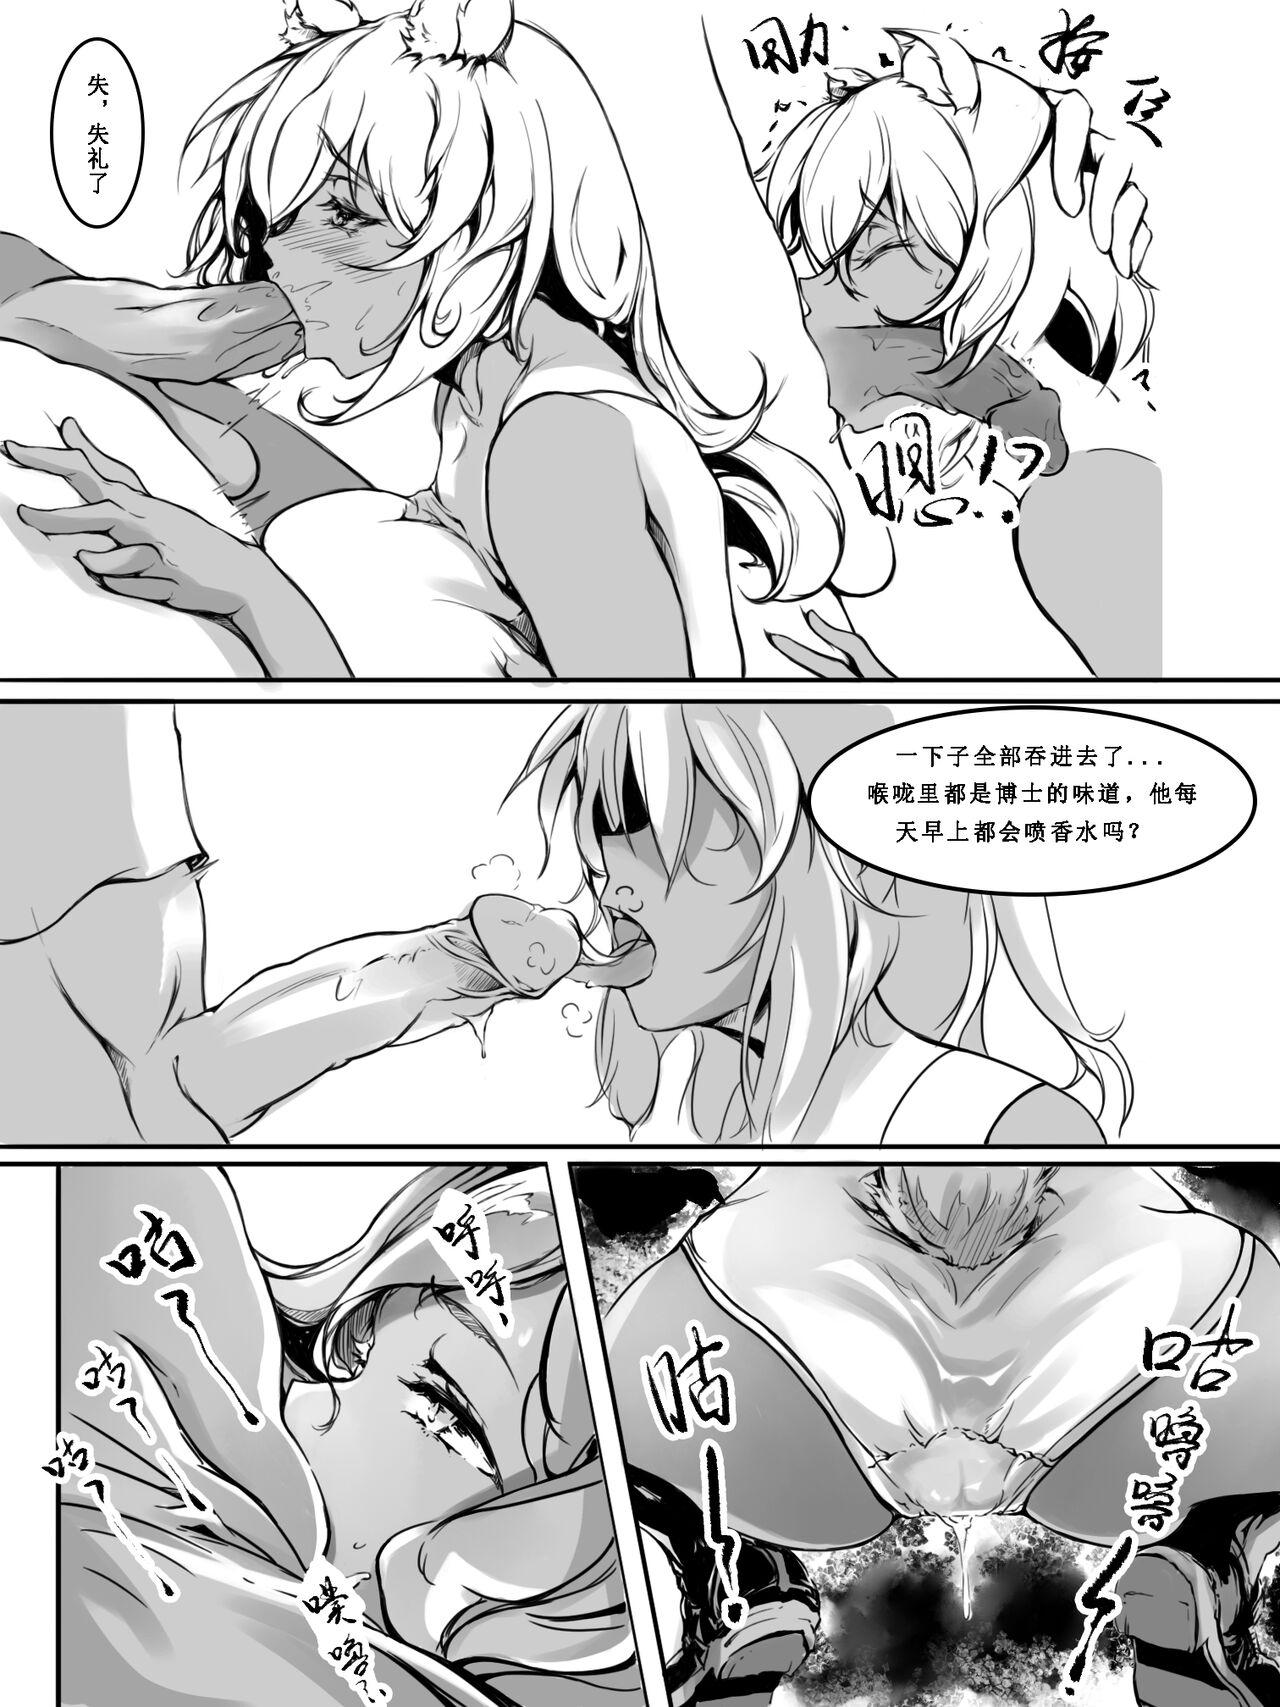 Granny Gravel R18 Doujinshi - Arknights Hot Wife - Page 8